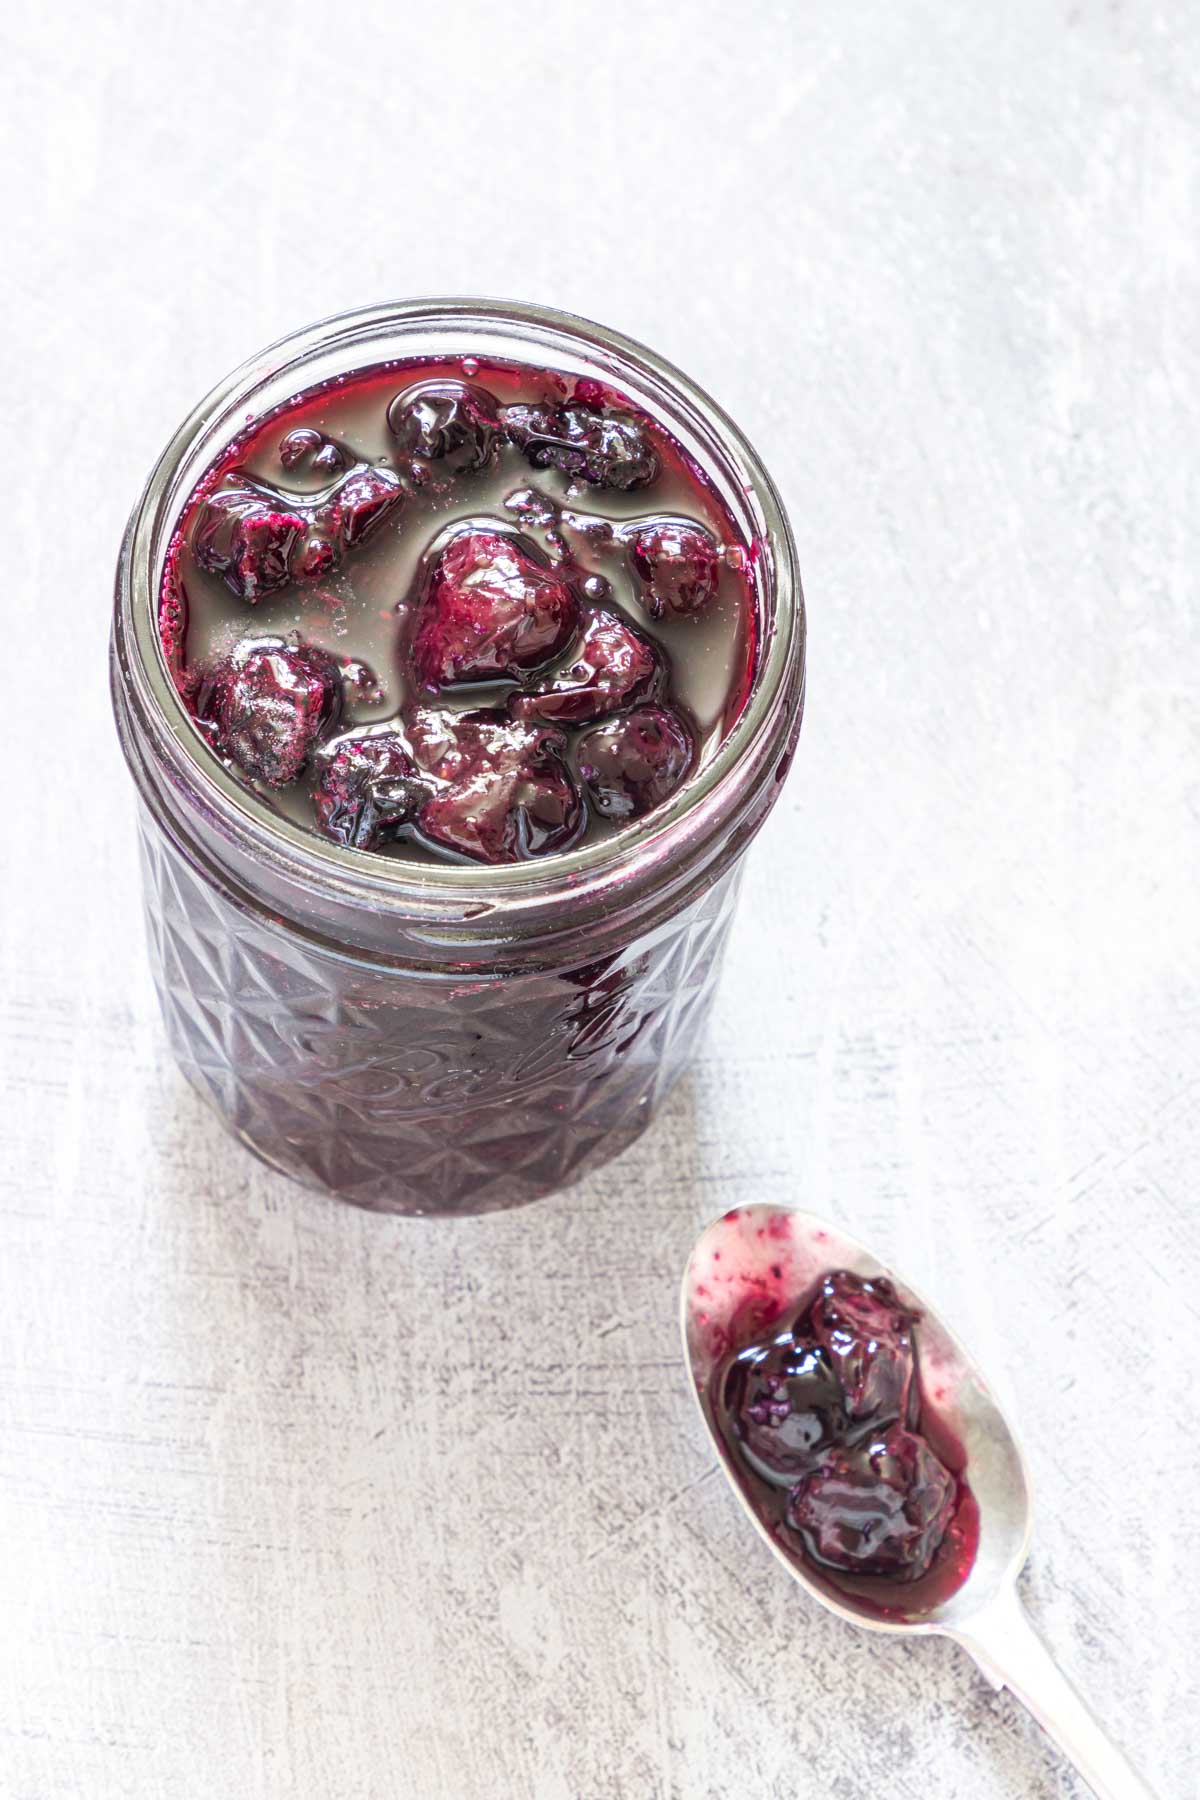 a jar full of homemade blueberry compote with a teaspoon next to it